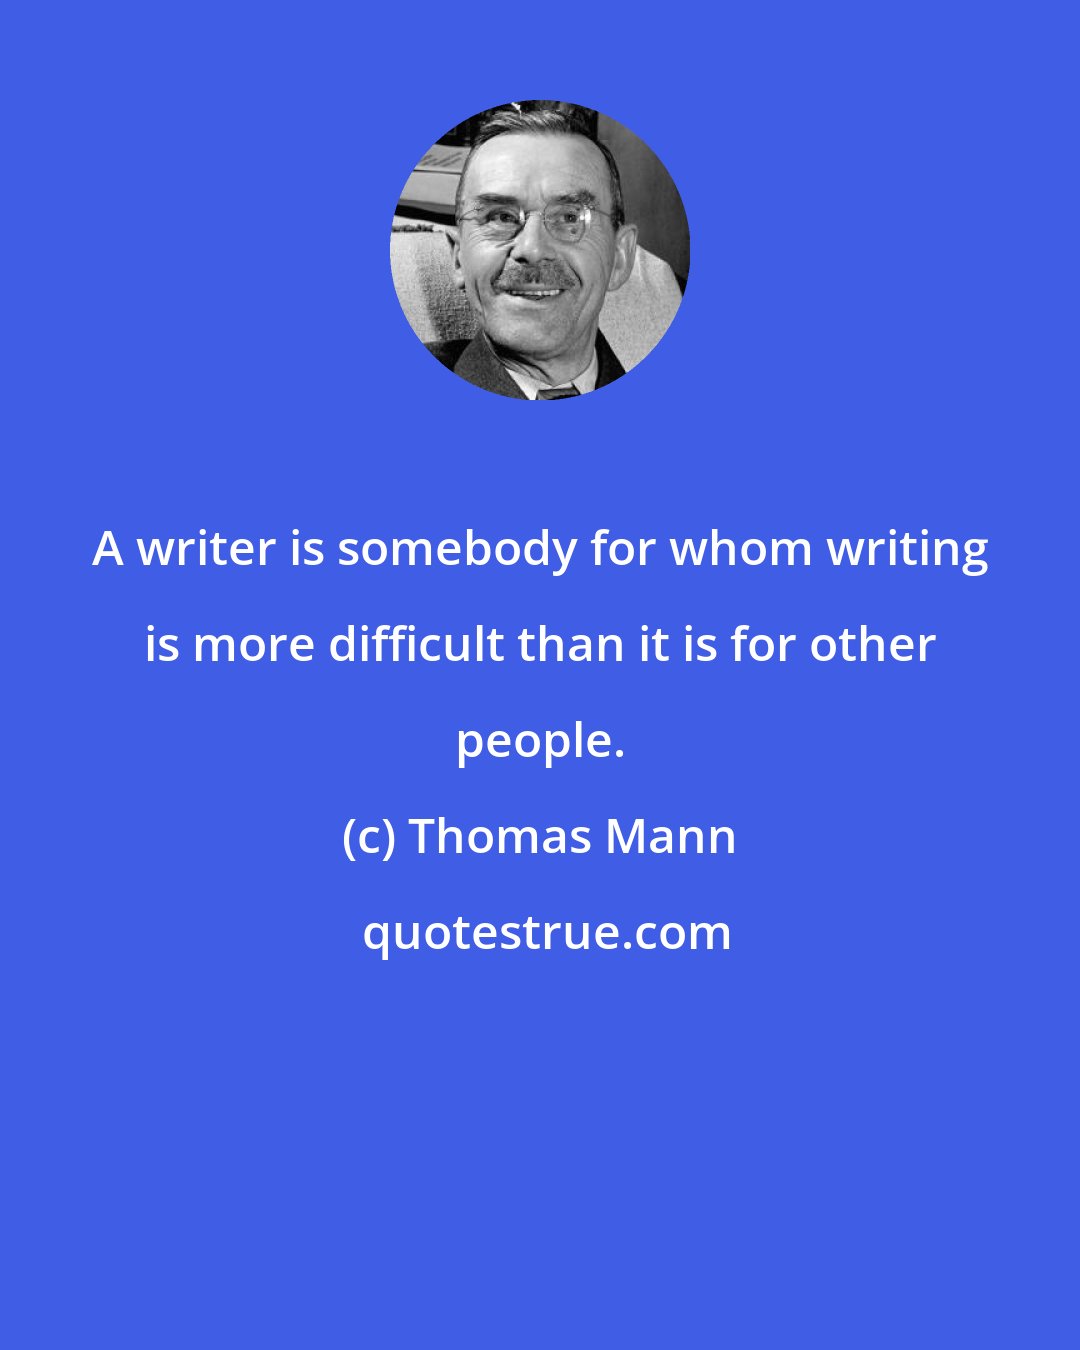 Thomas Mann: A writer is somebody for whom writing is more difficult than it is for other people.